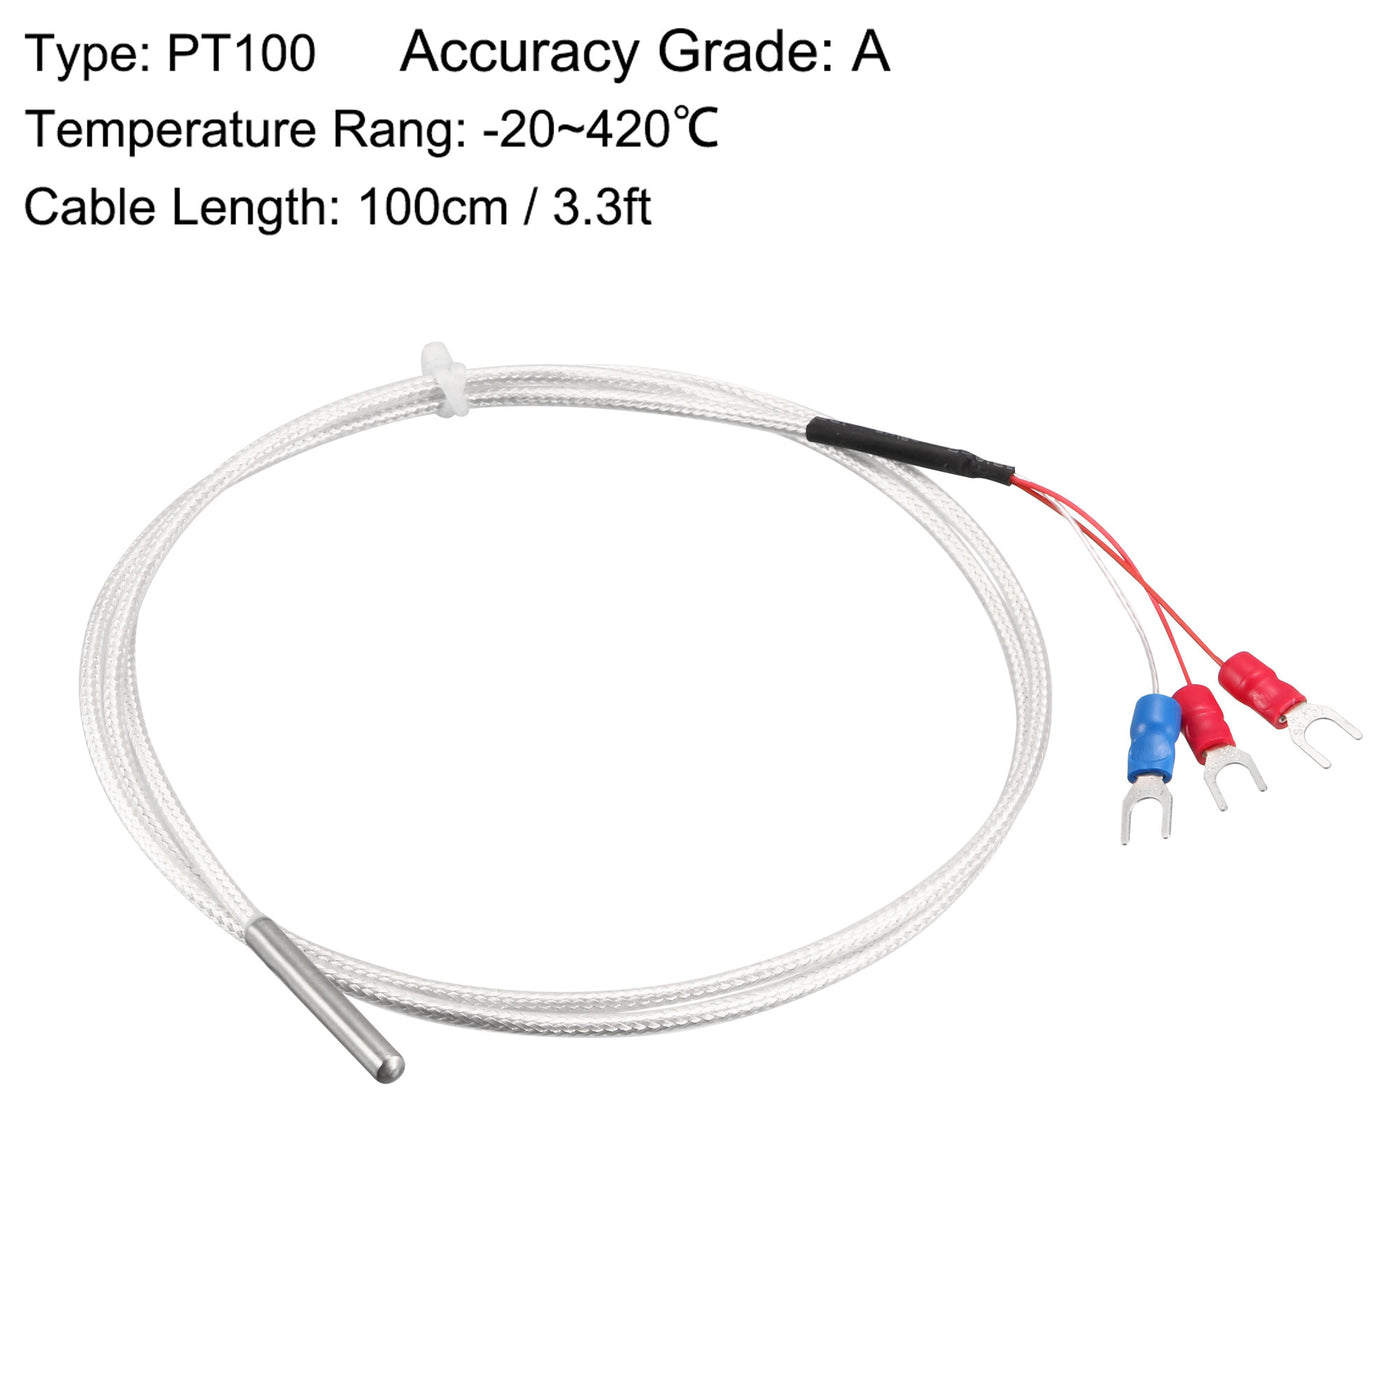 uxcell Uxcell PT100 RTD Temperature Sensor Probe 3 Wires Cable Thermocouple Stainless Steel 100cm(3.3ft) (Temperature Rang: -50 to 200C)